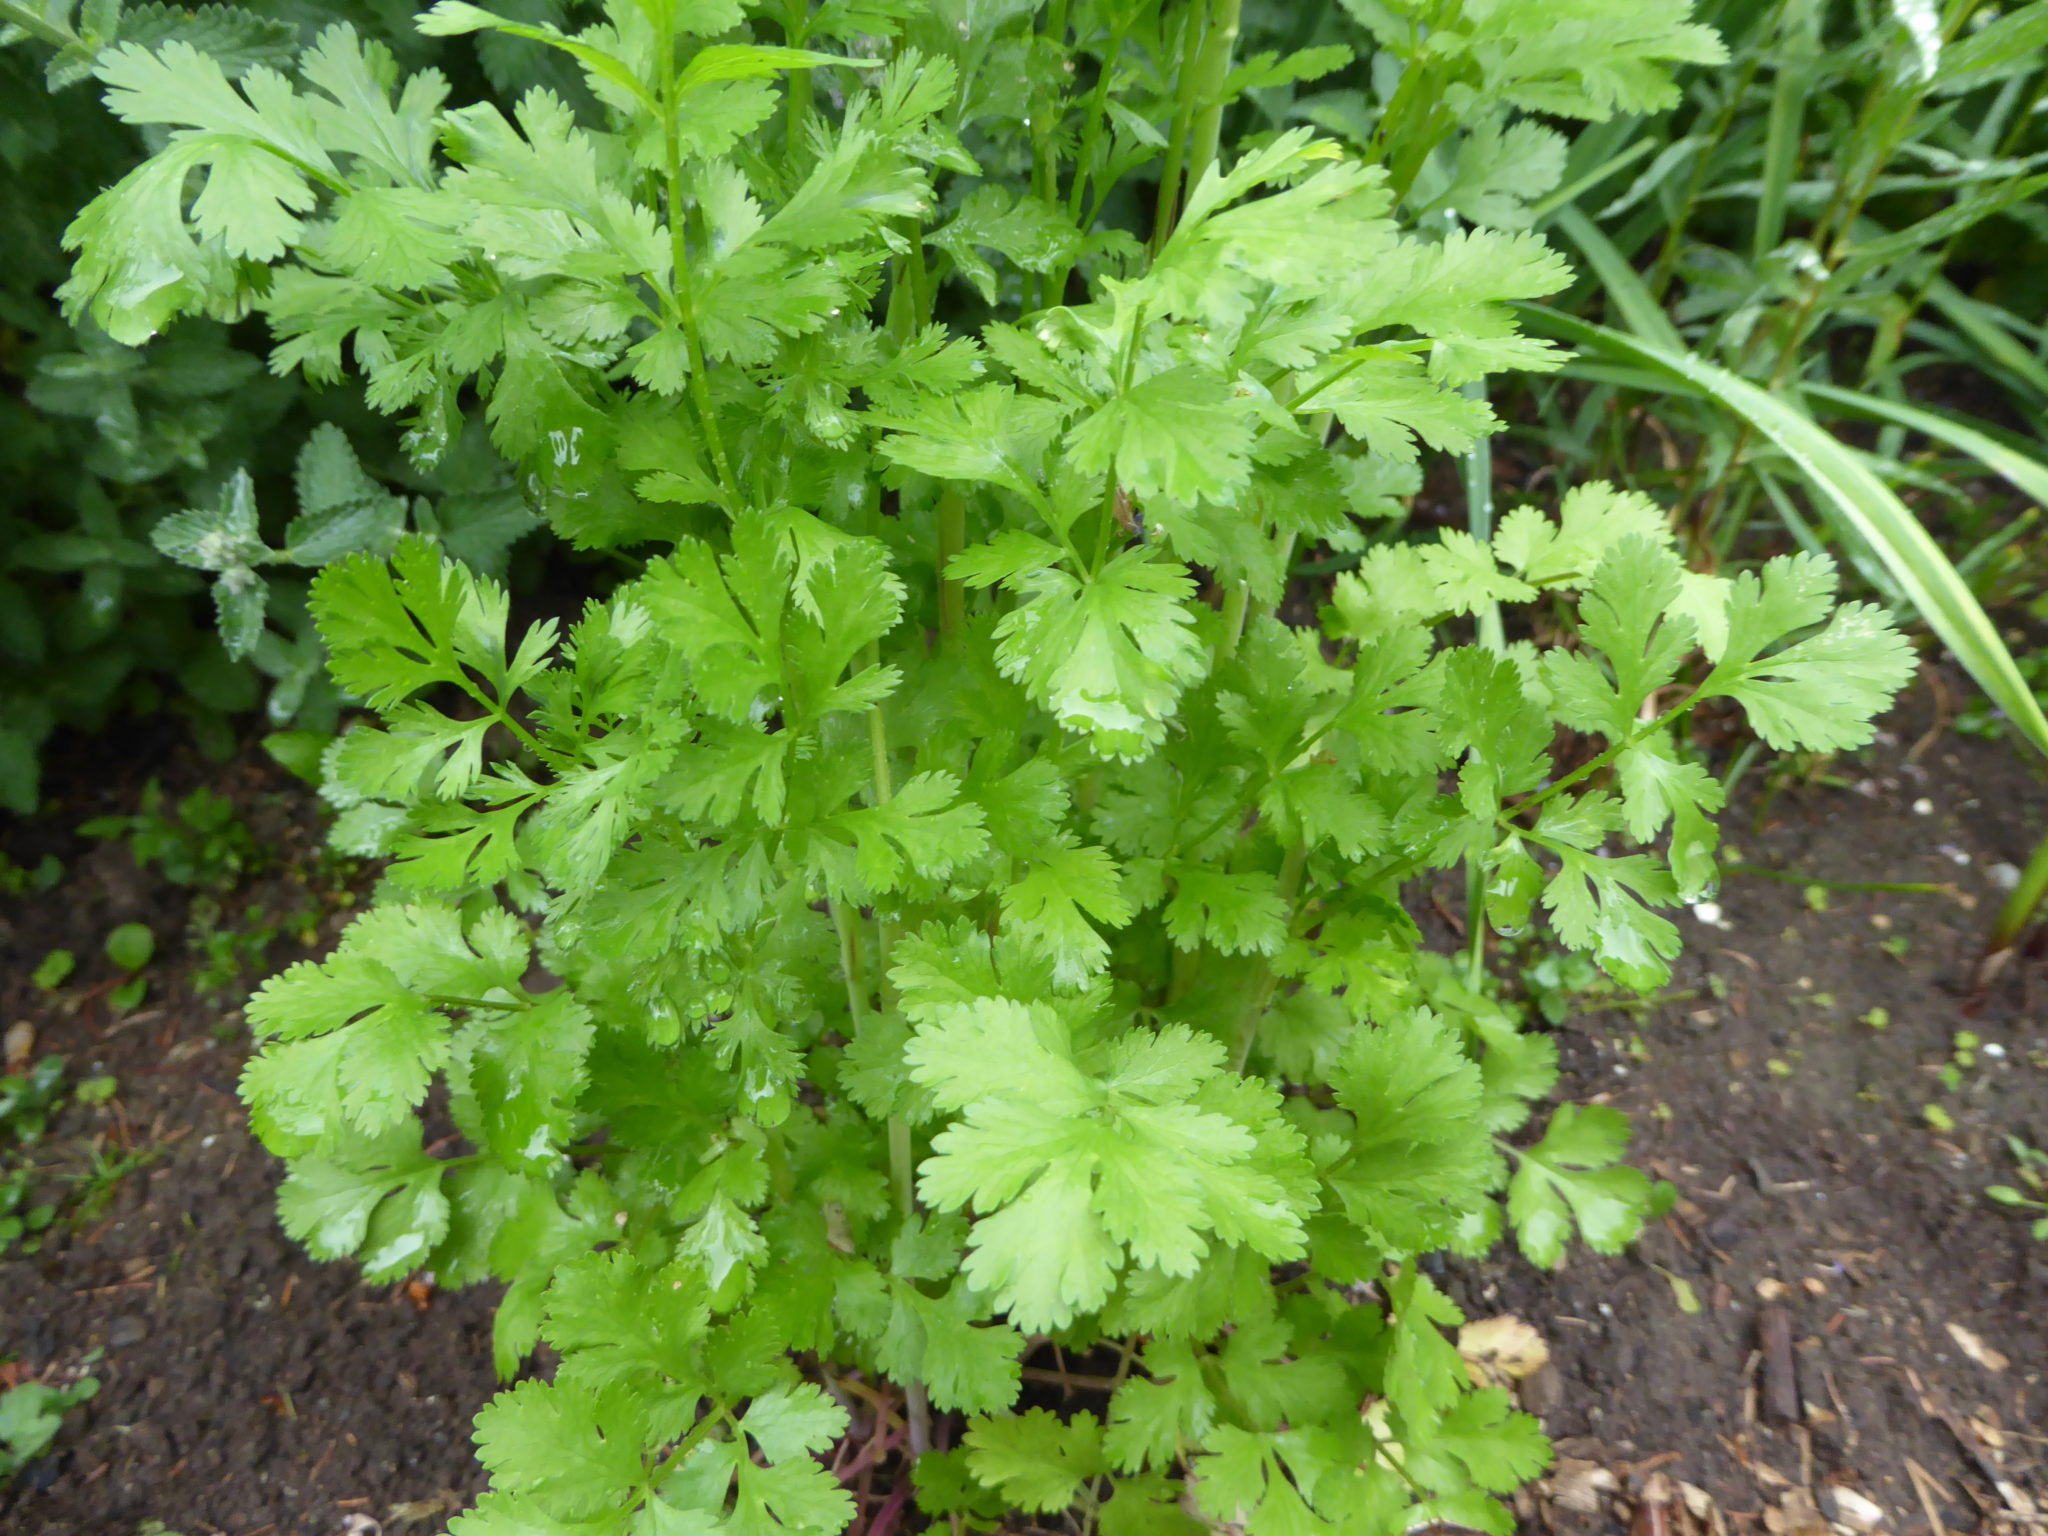 Free cilantro images, Herb photography, Visuals for recipes, Culinary inspiration, 2050x1540 HD Desktop